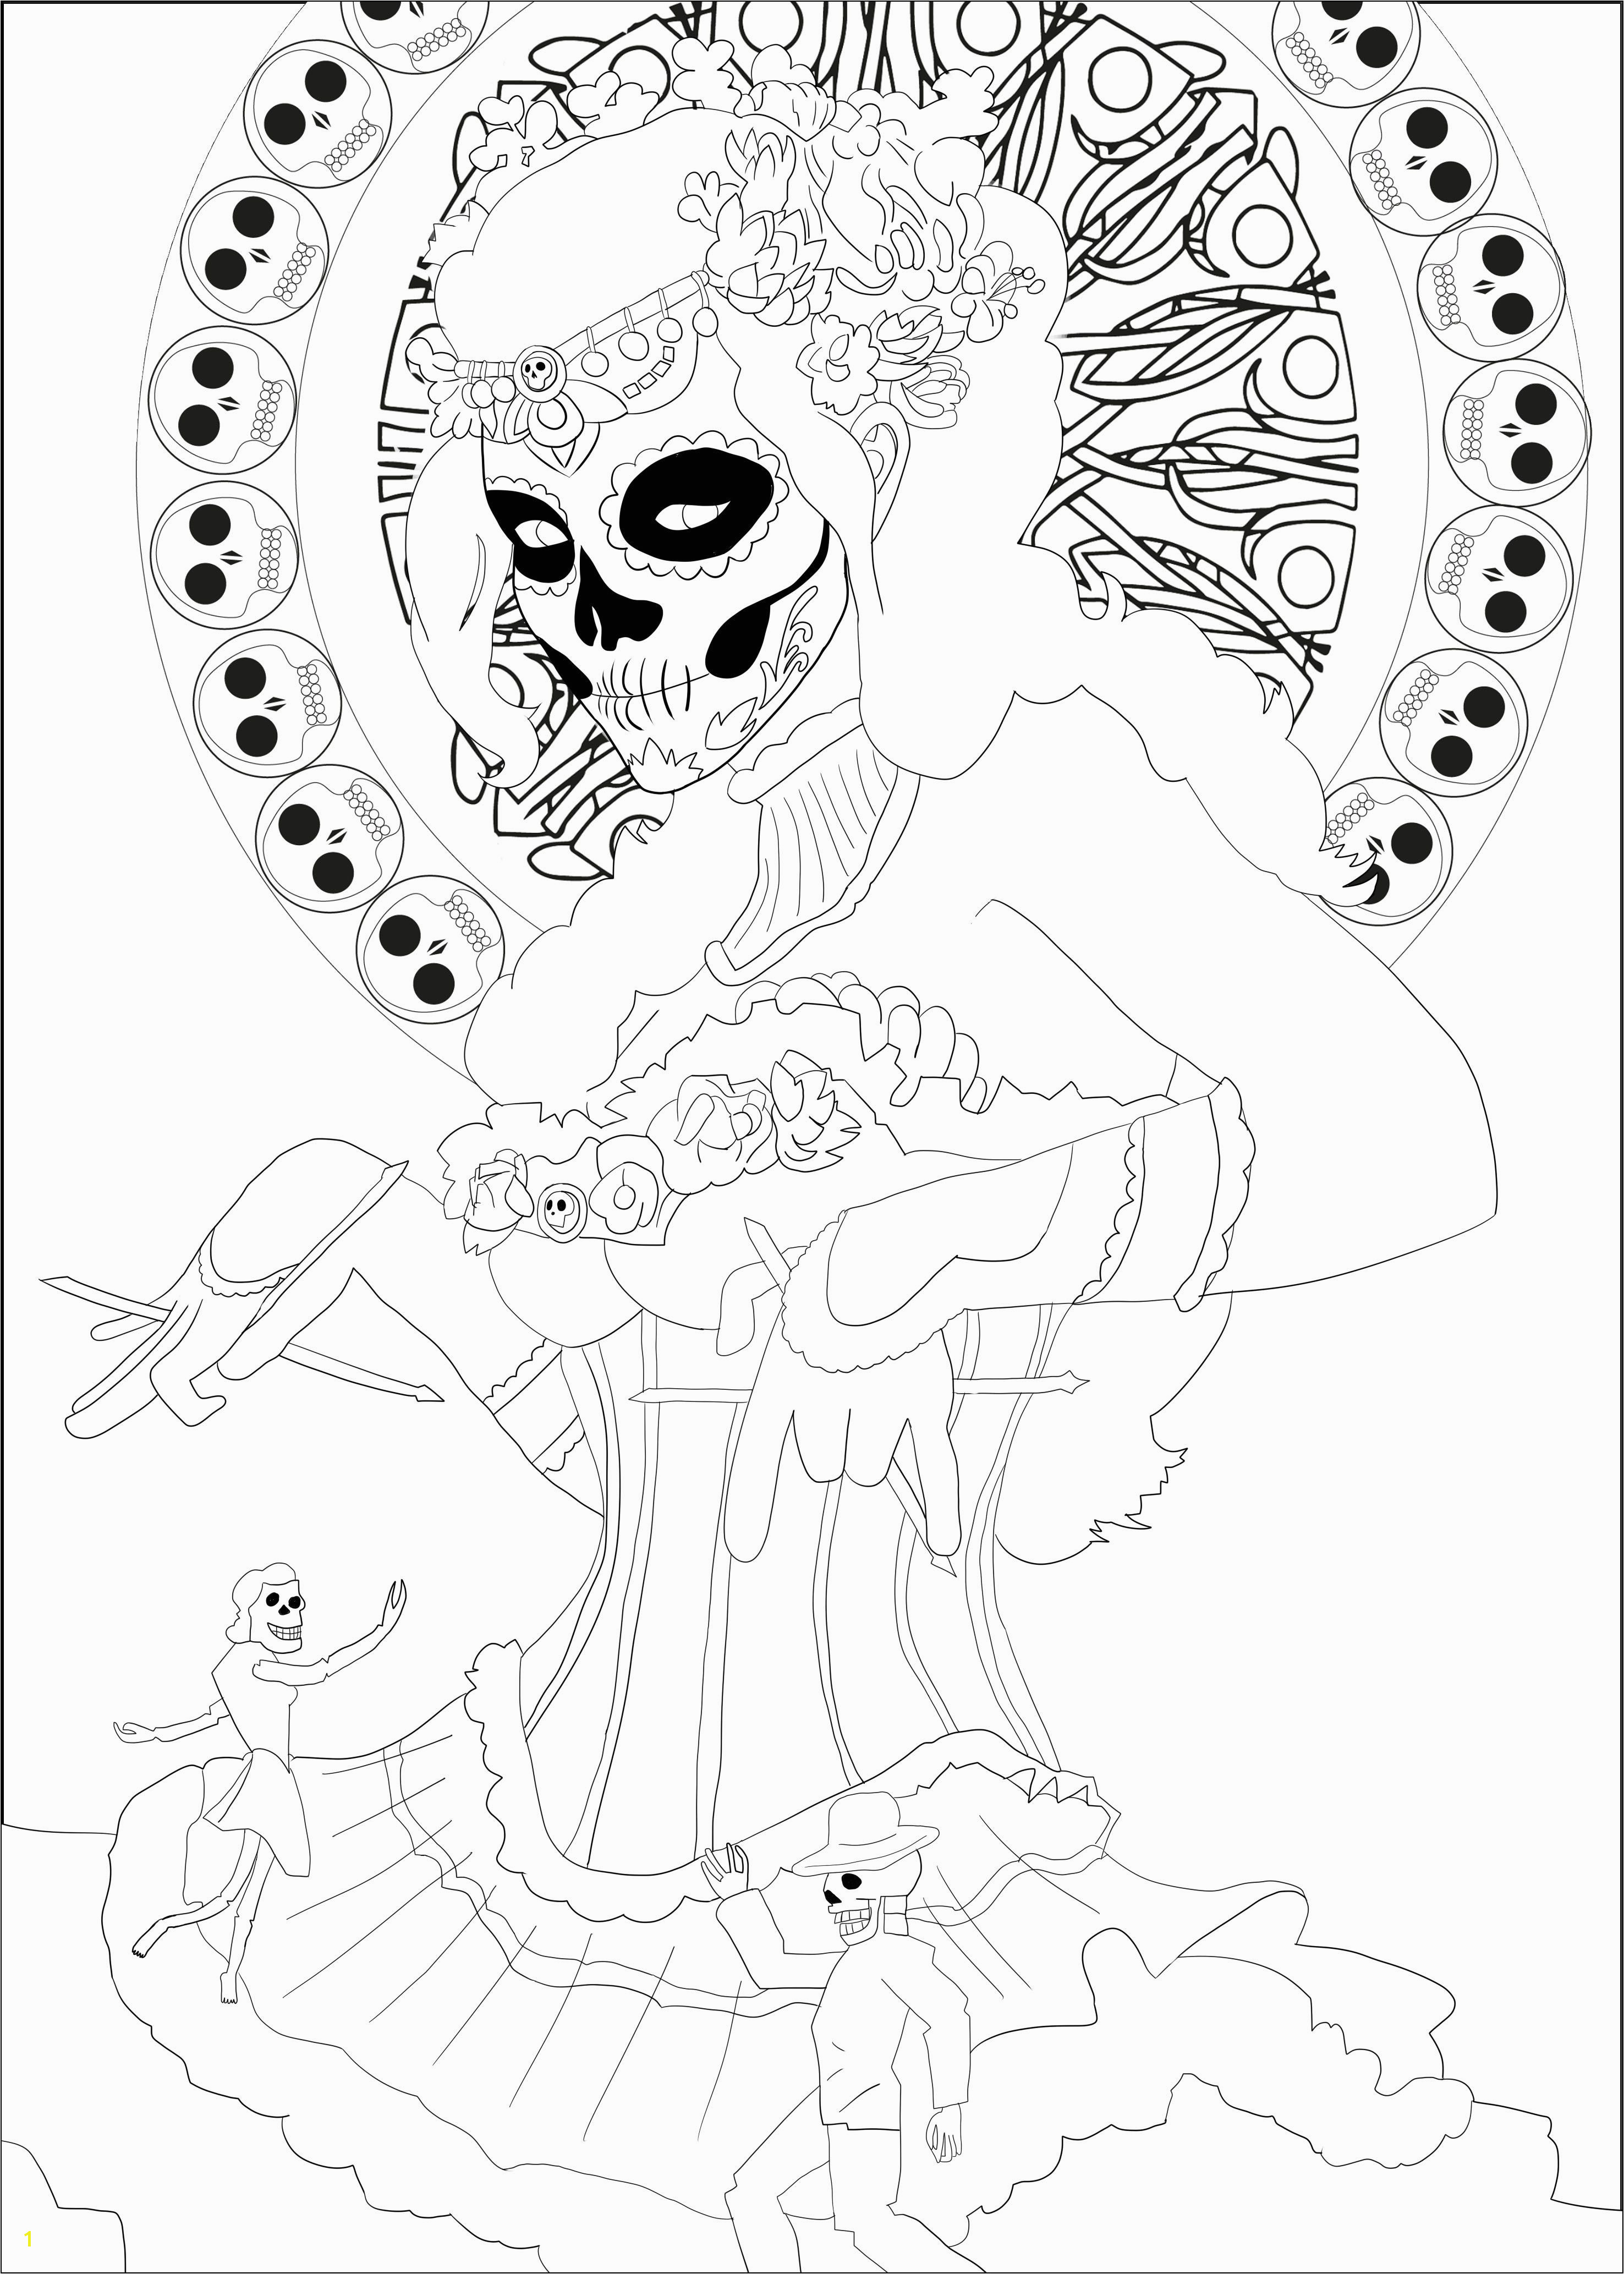 Mexican Coloring Pages for Adults Coloring Page Inspired by the Mexican Celebration D as De Los